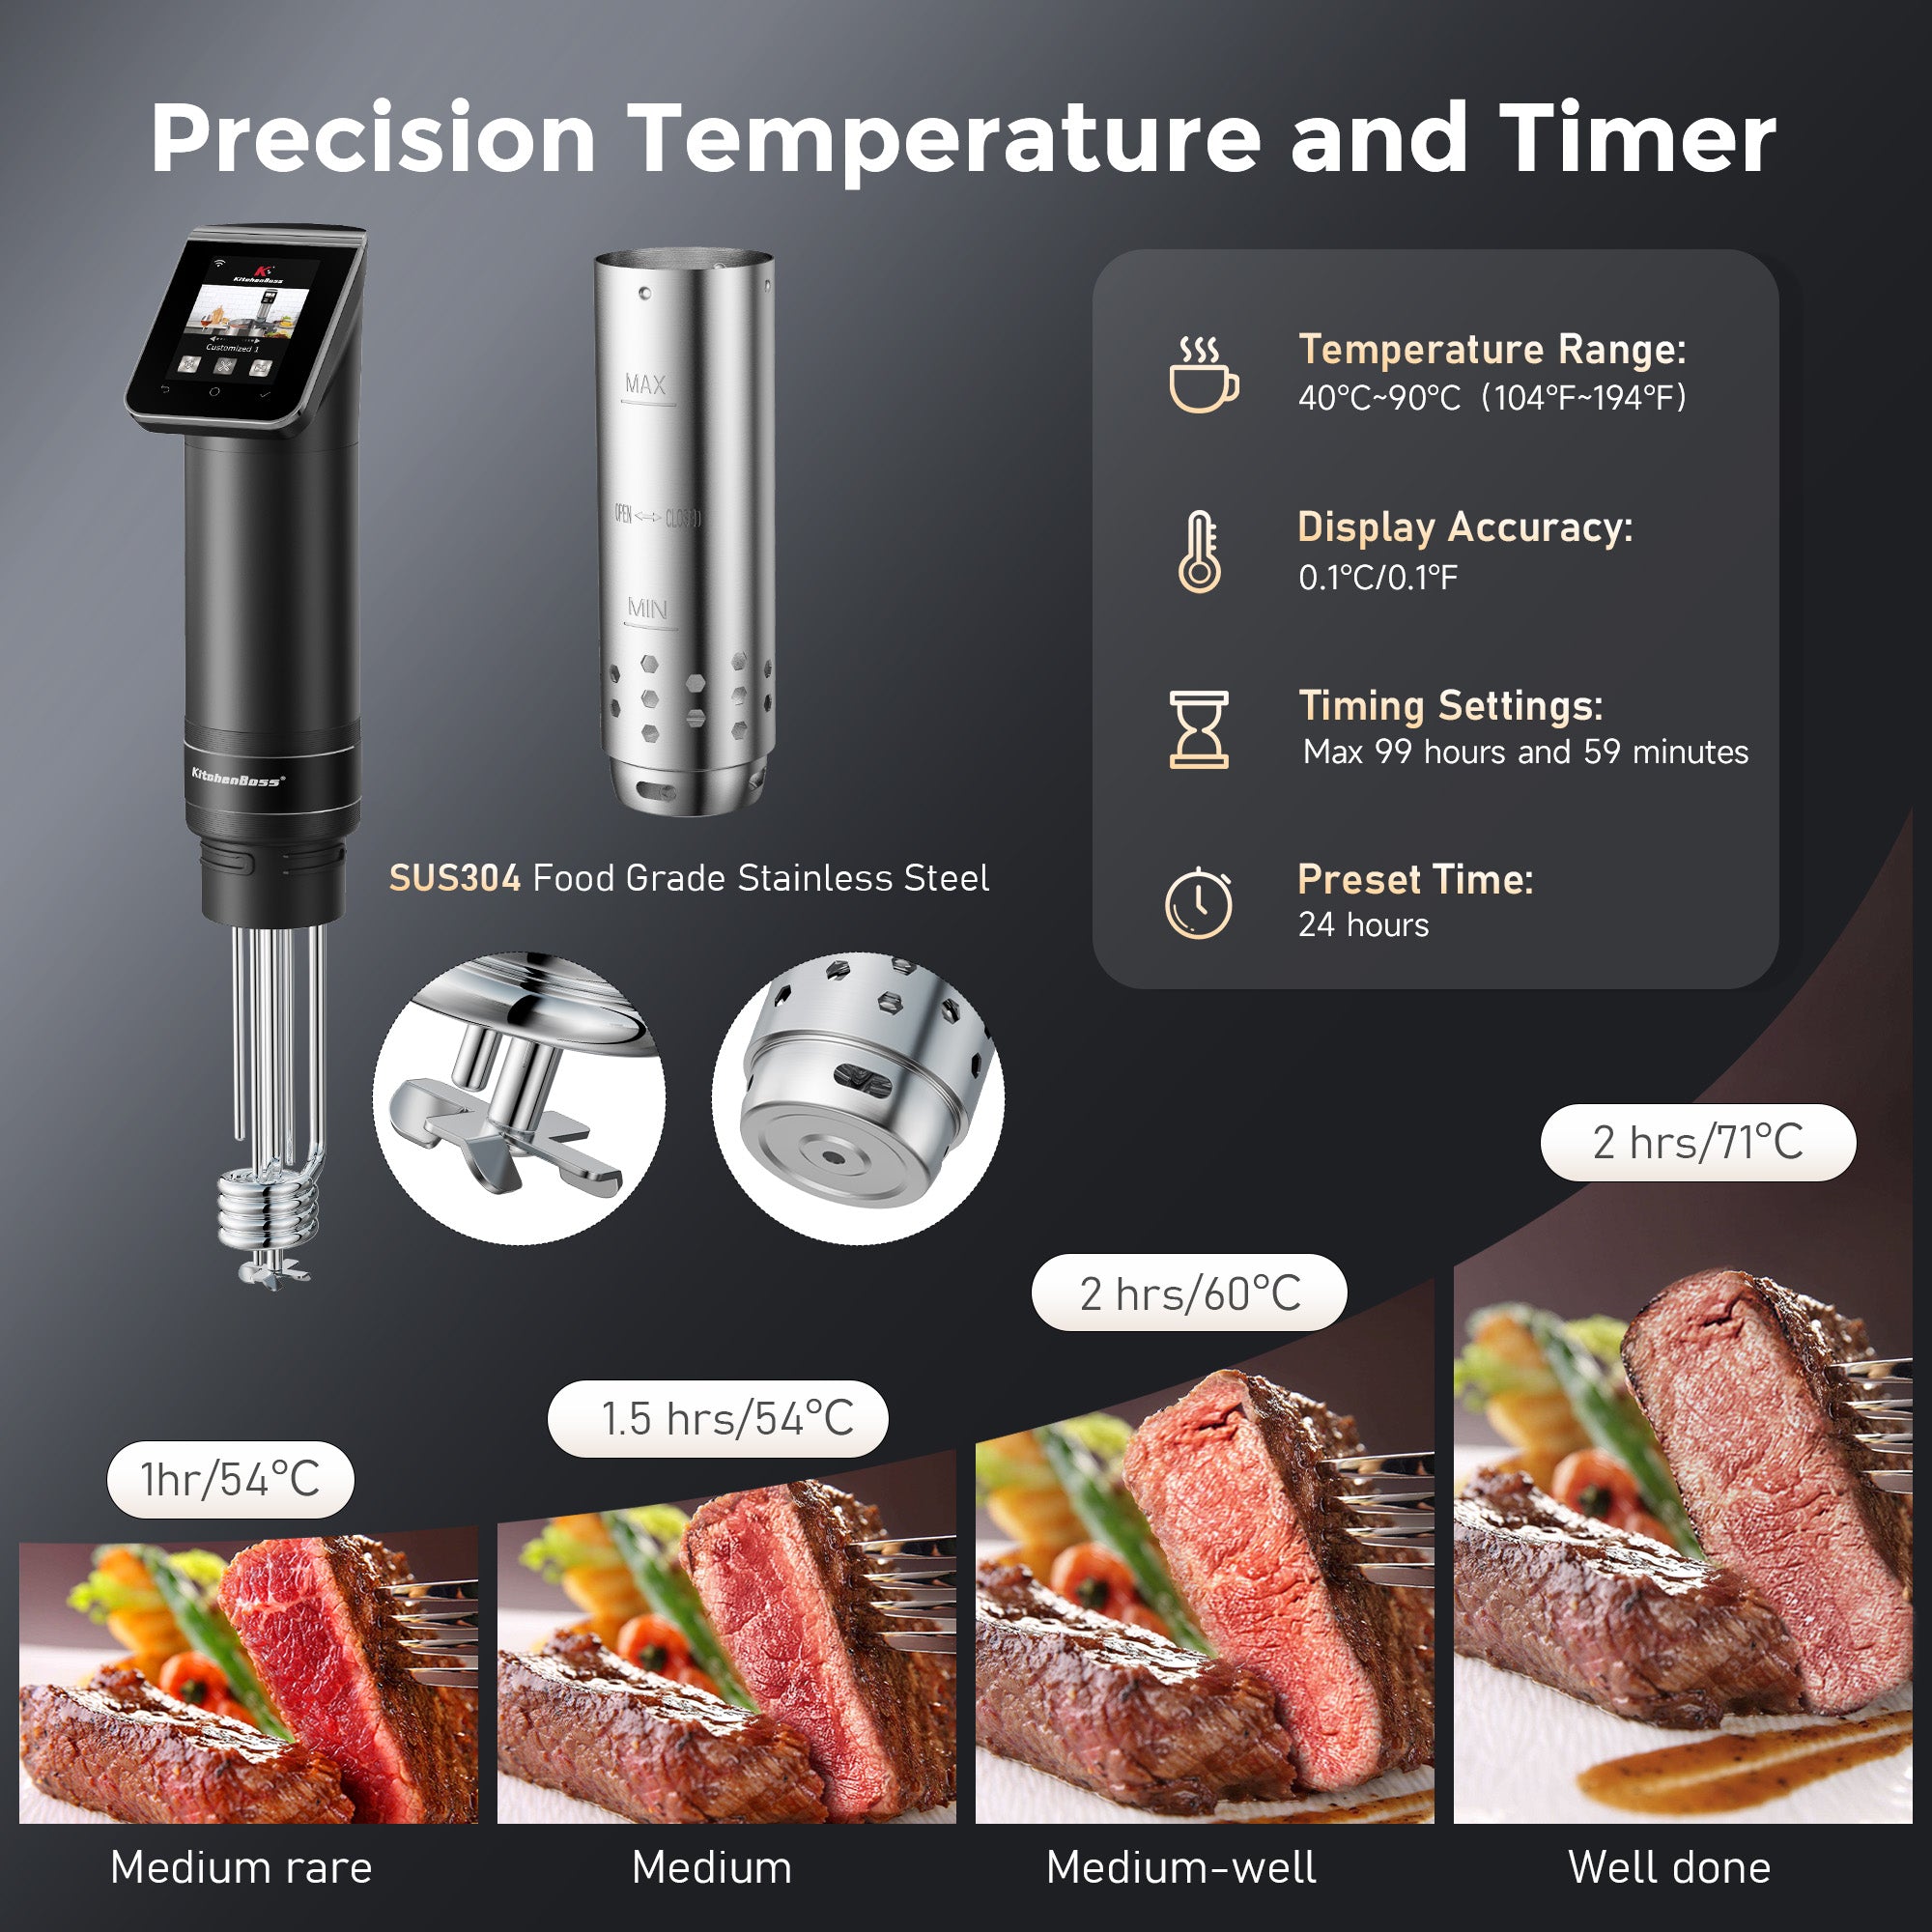 1100 Watts WIFI Sous Vide Cooker, Quiet Fast-Heating Sous Vide